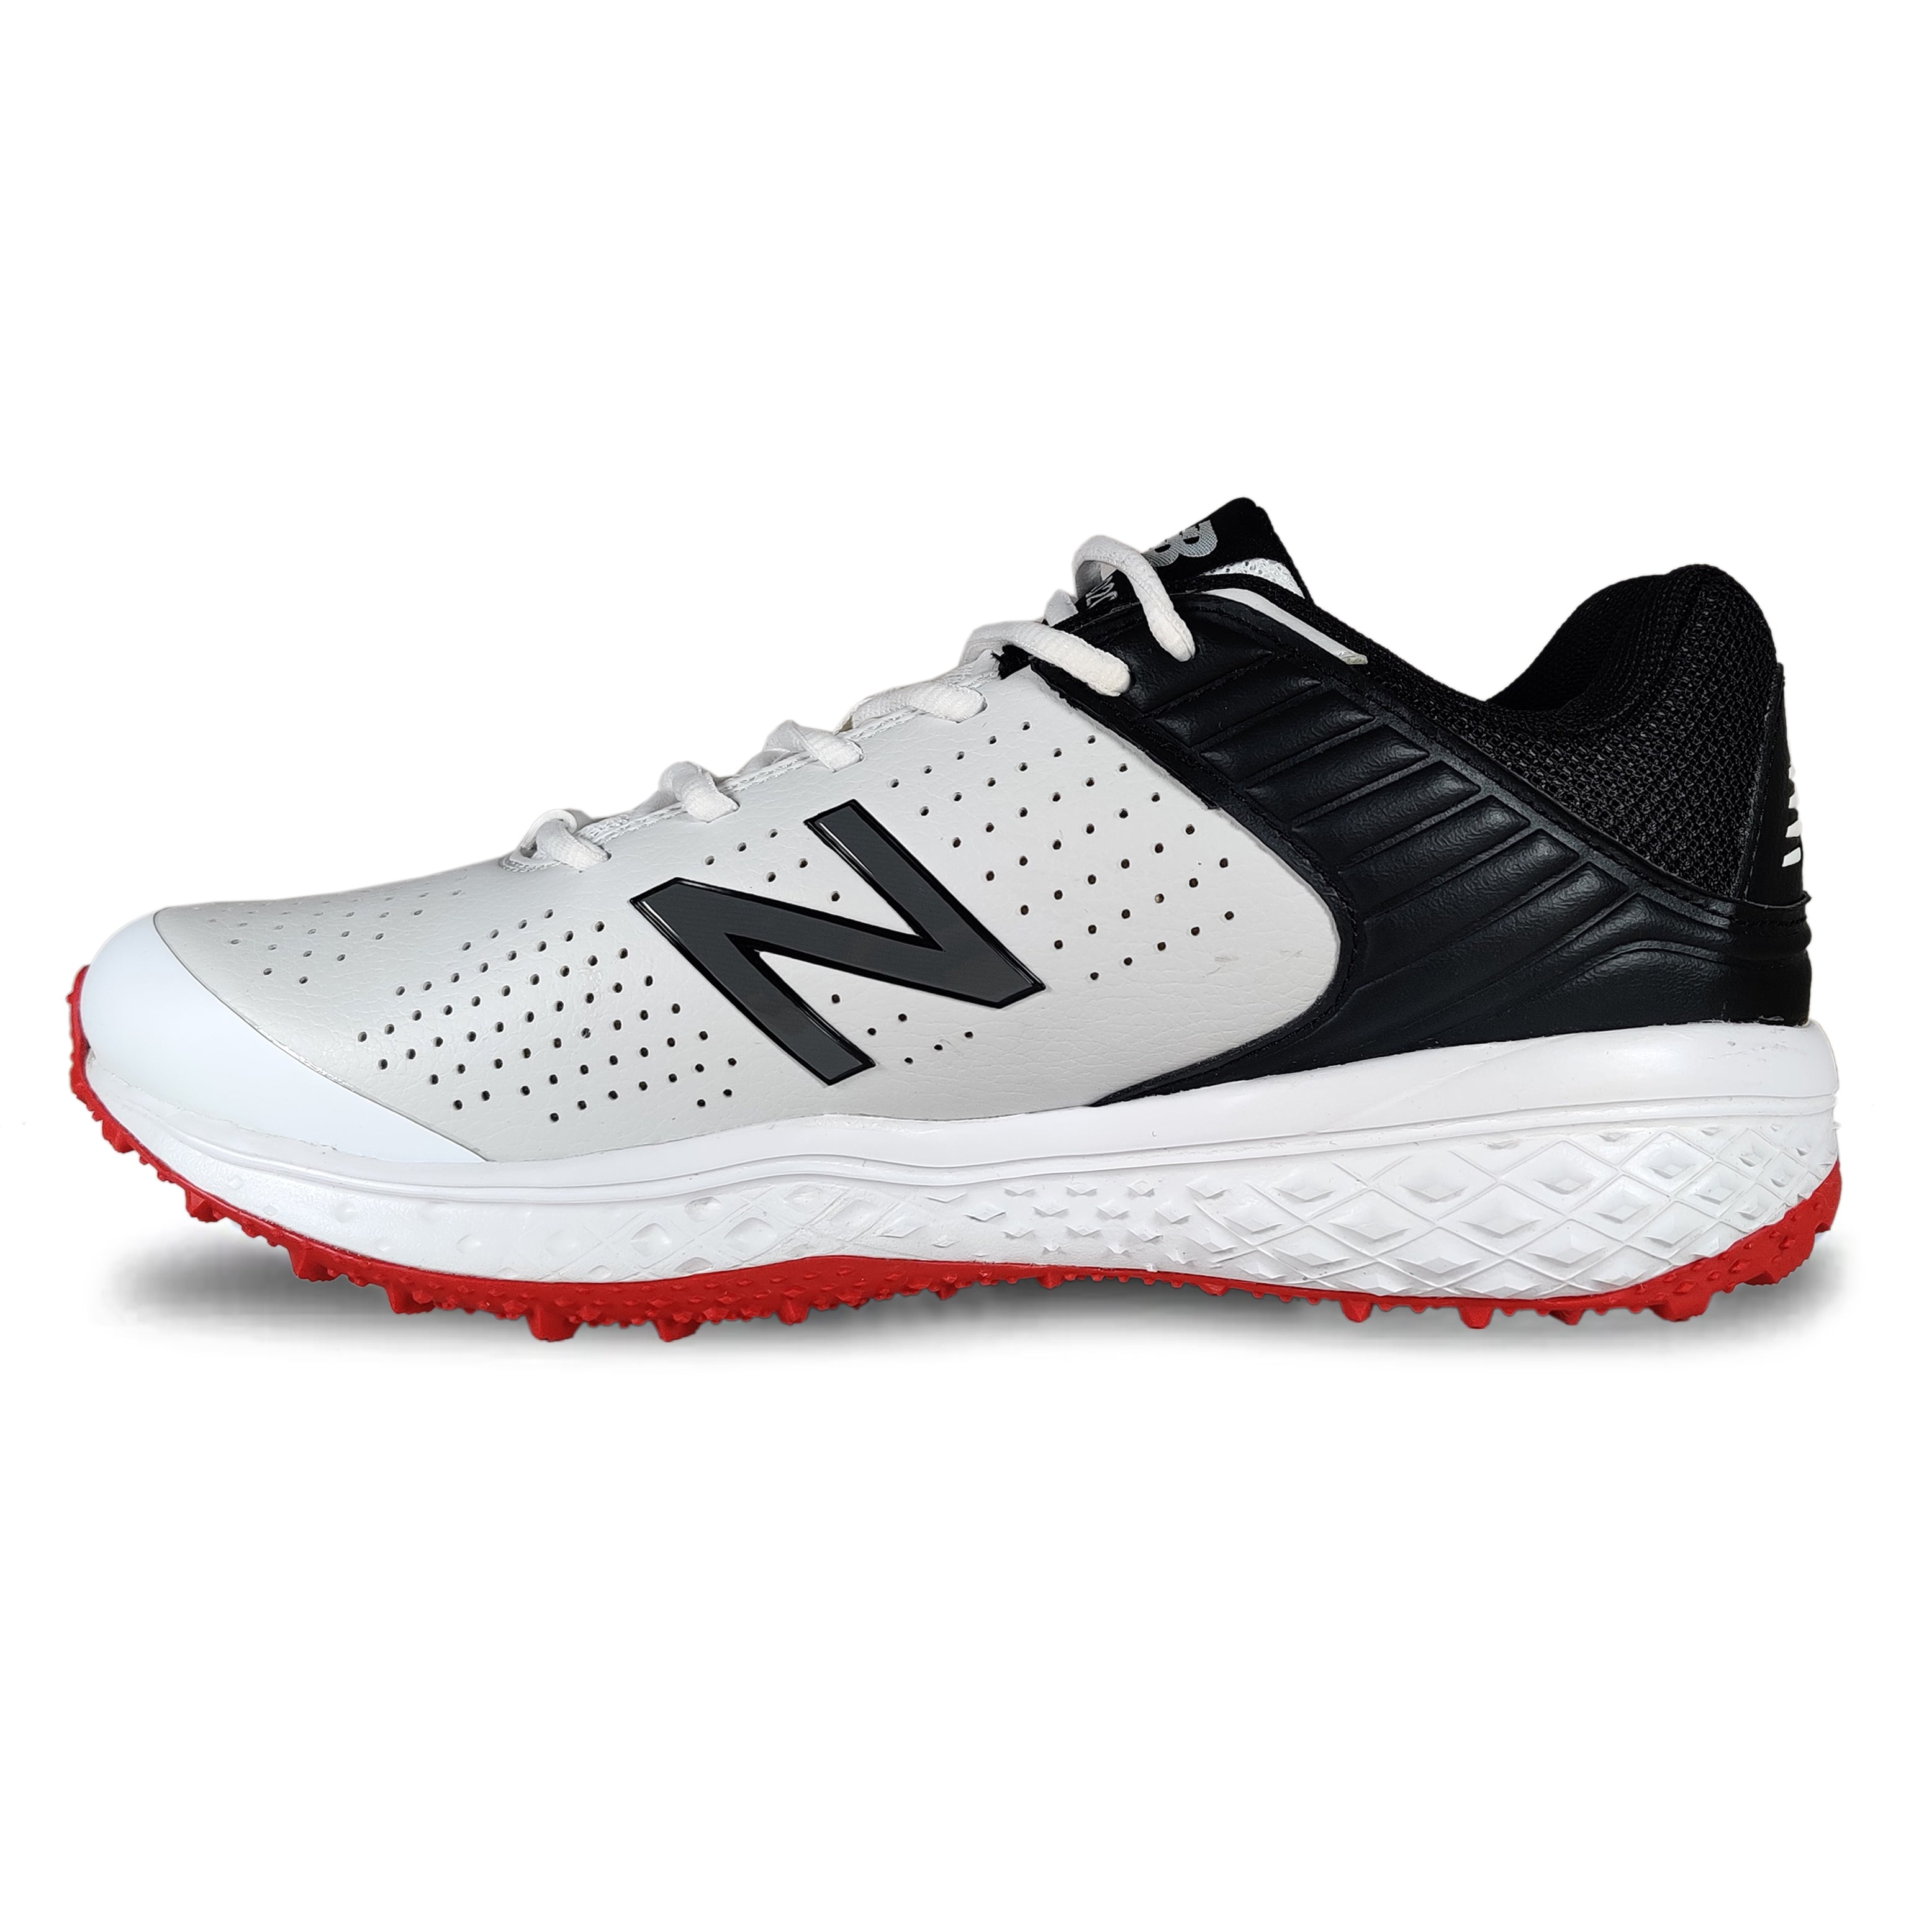 New Balance CK4040 J5 Spike Cricket Shoes White Cyber Jade,- Buy New Balance  CK4040 J5 Spike Cricket Shoes White Cyber Jade Online at Lowest Prices in  India - | khelmart.com